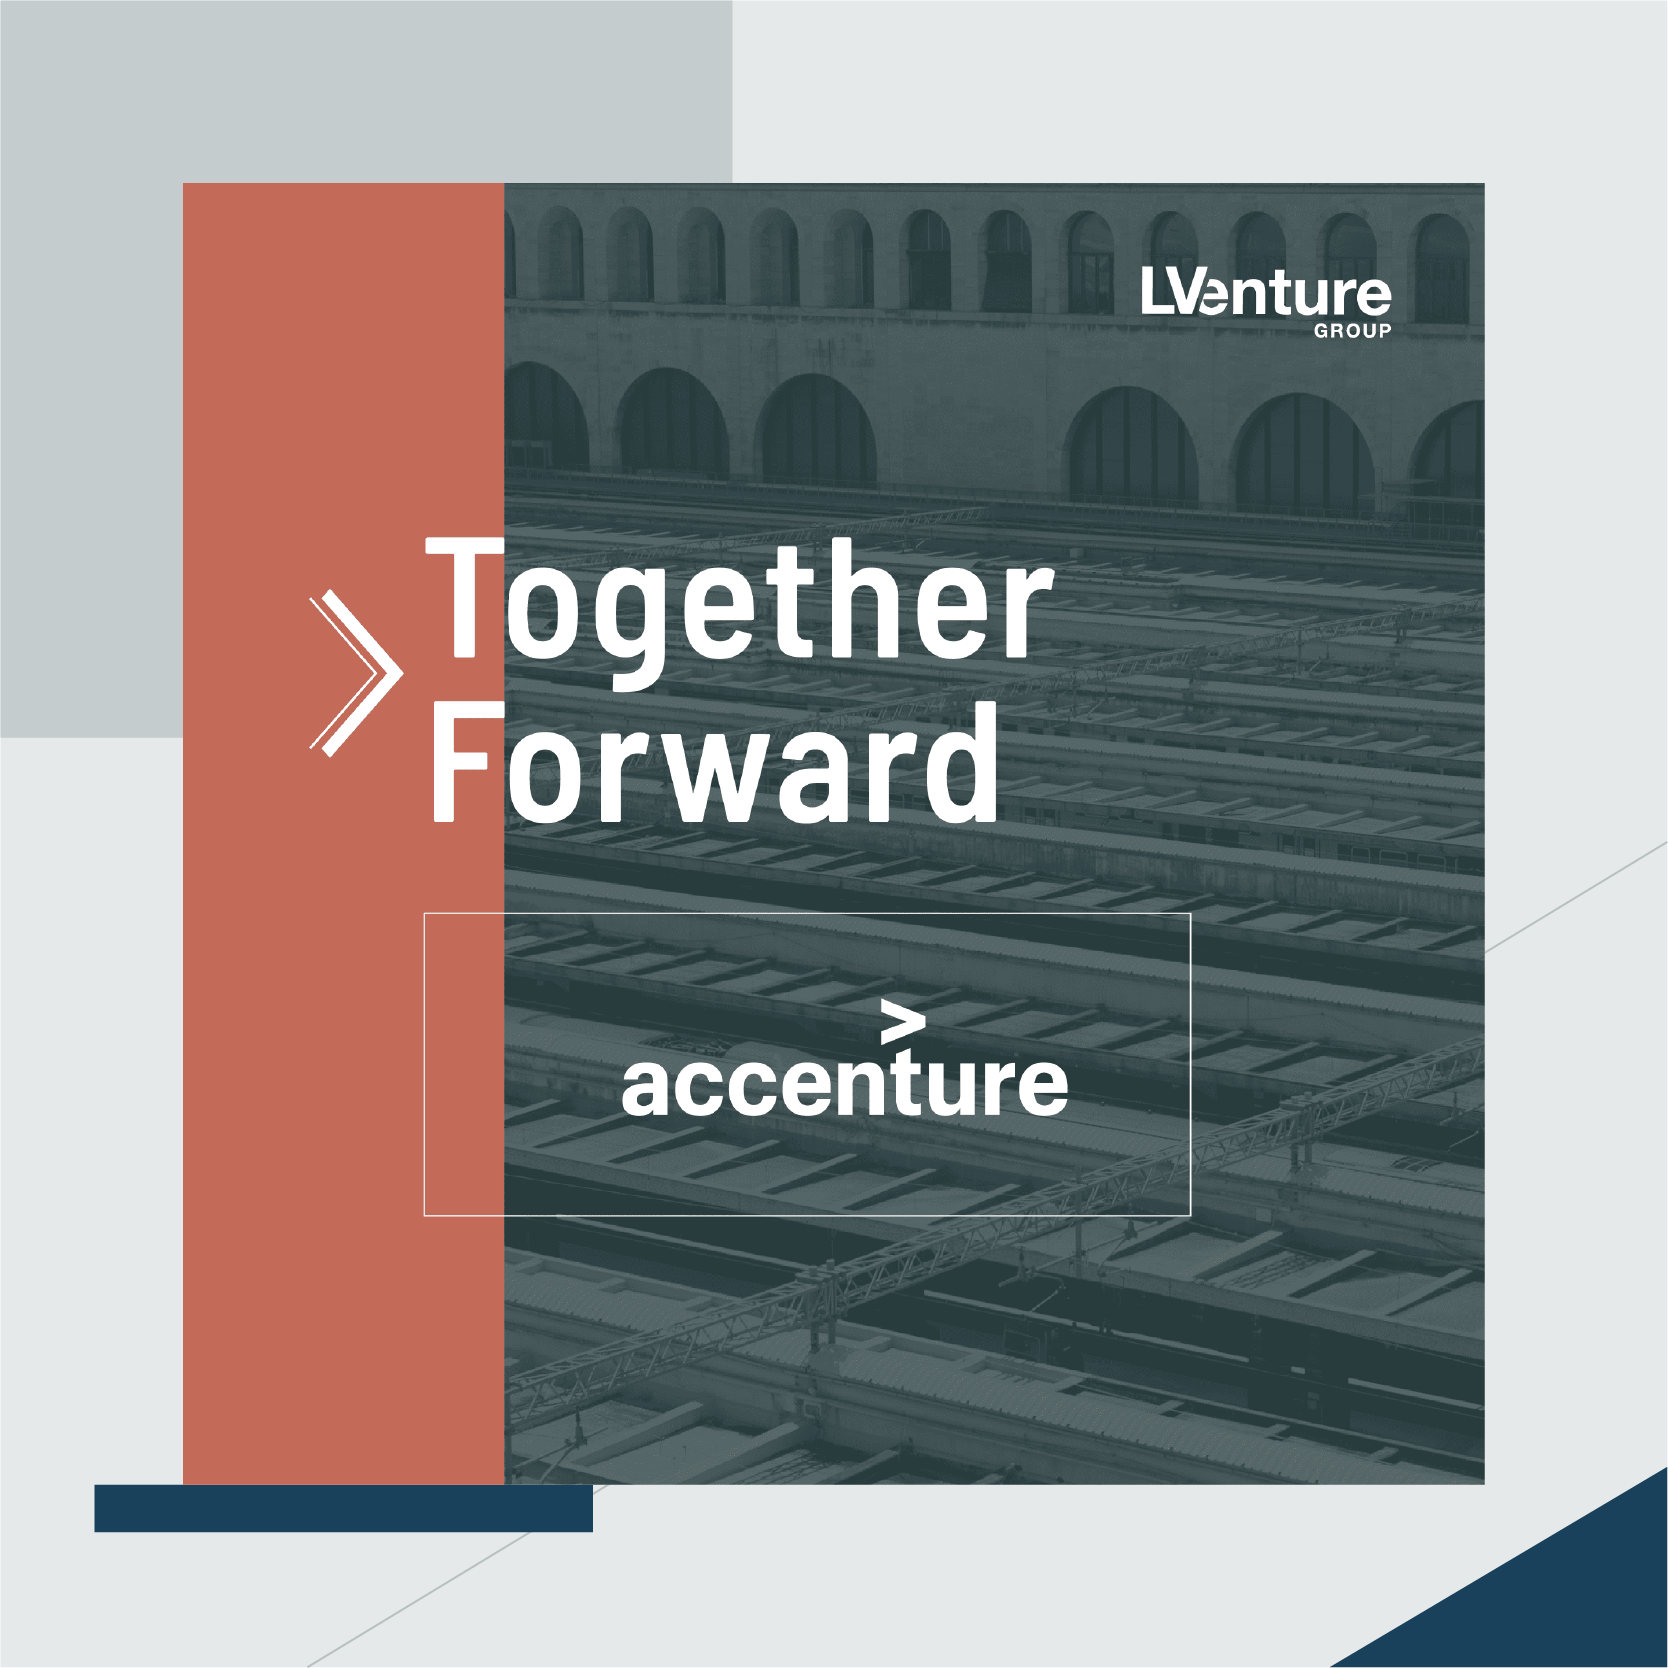 LVenture Group renews its strategic partnership with Accenture